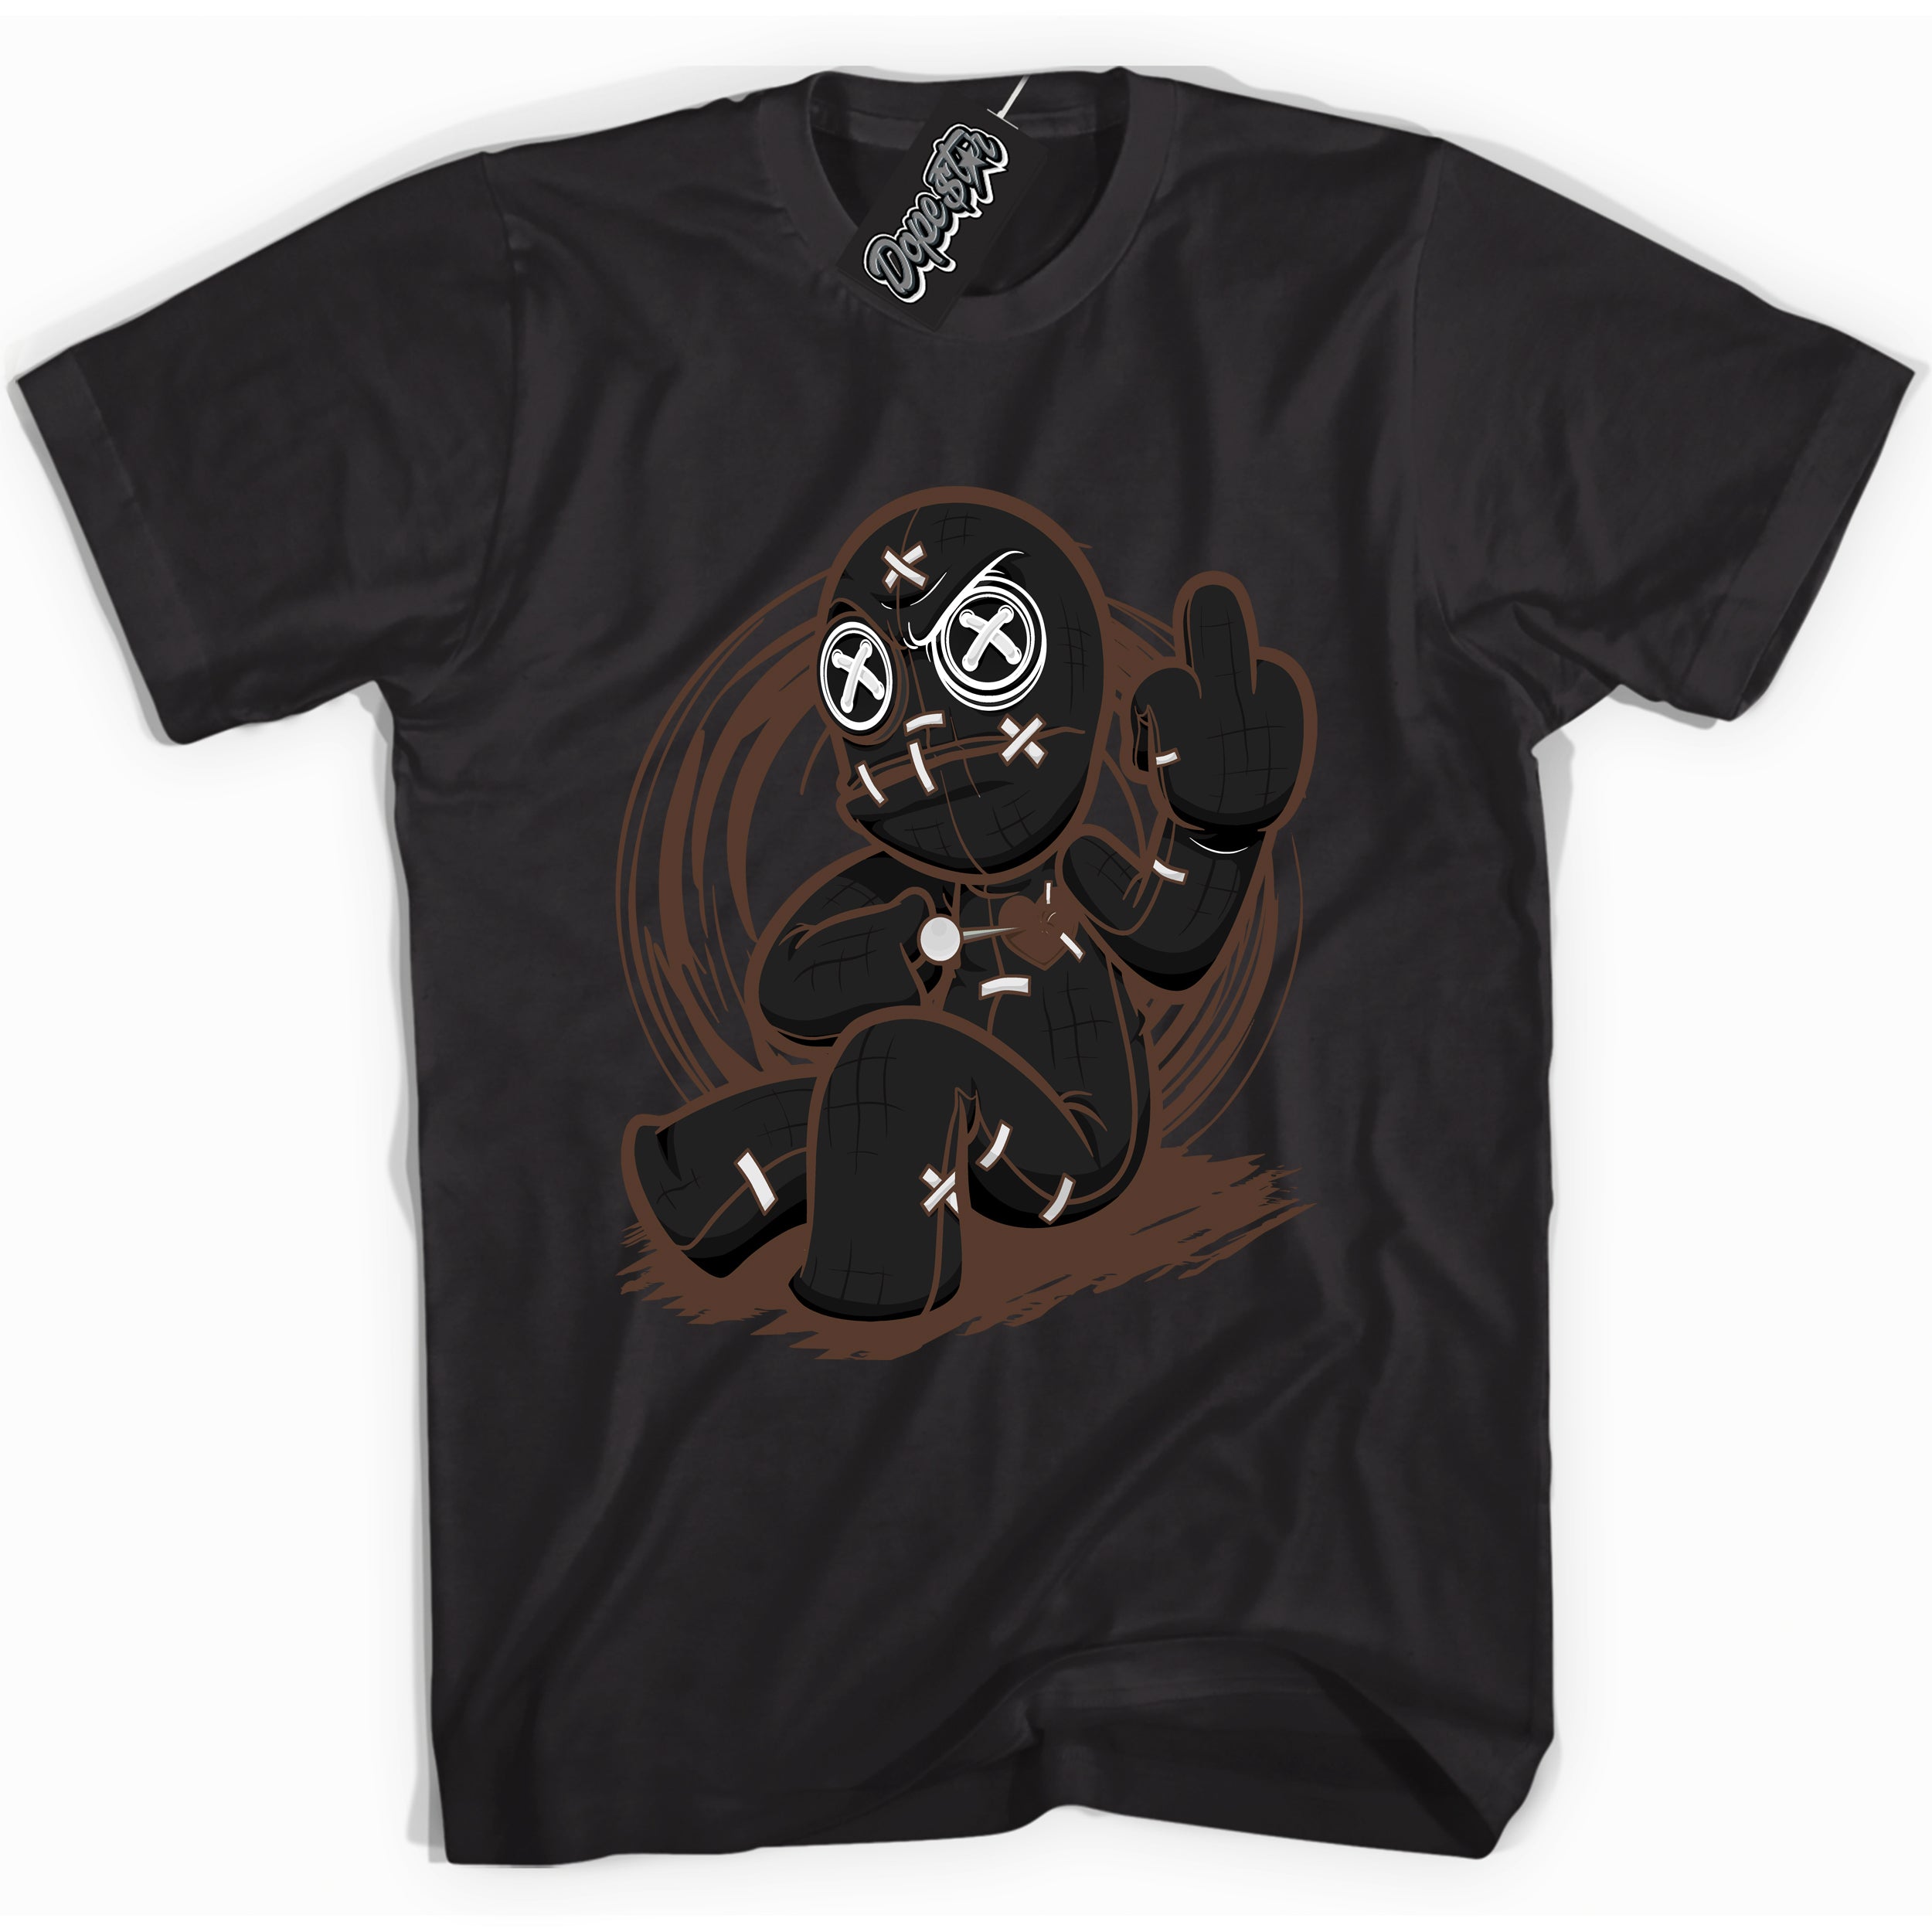 Cool Black graphic tee with “ VooDoo Doll ” design, that perfectly matches Palomino 1s sneakers 